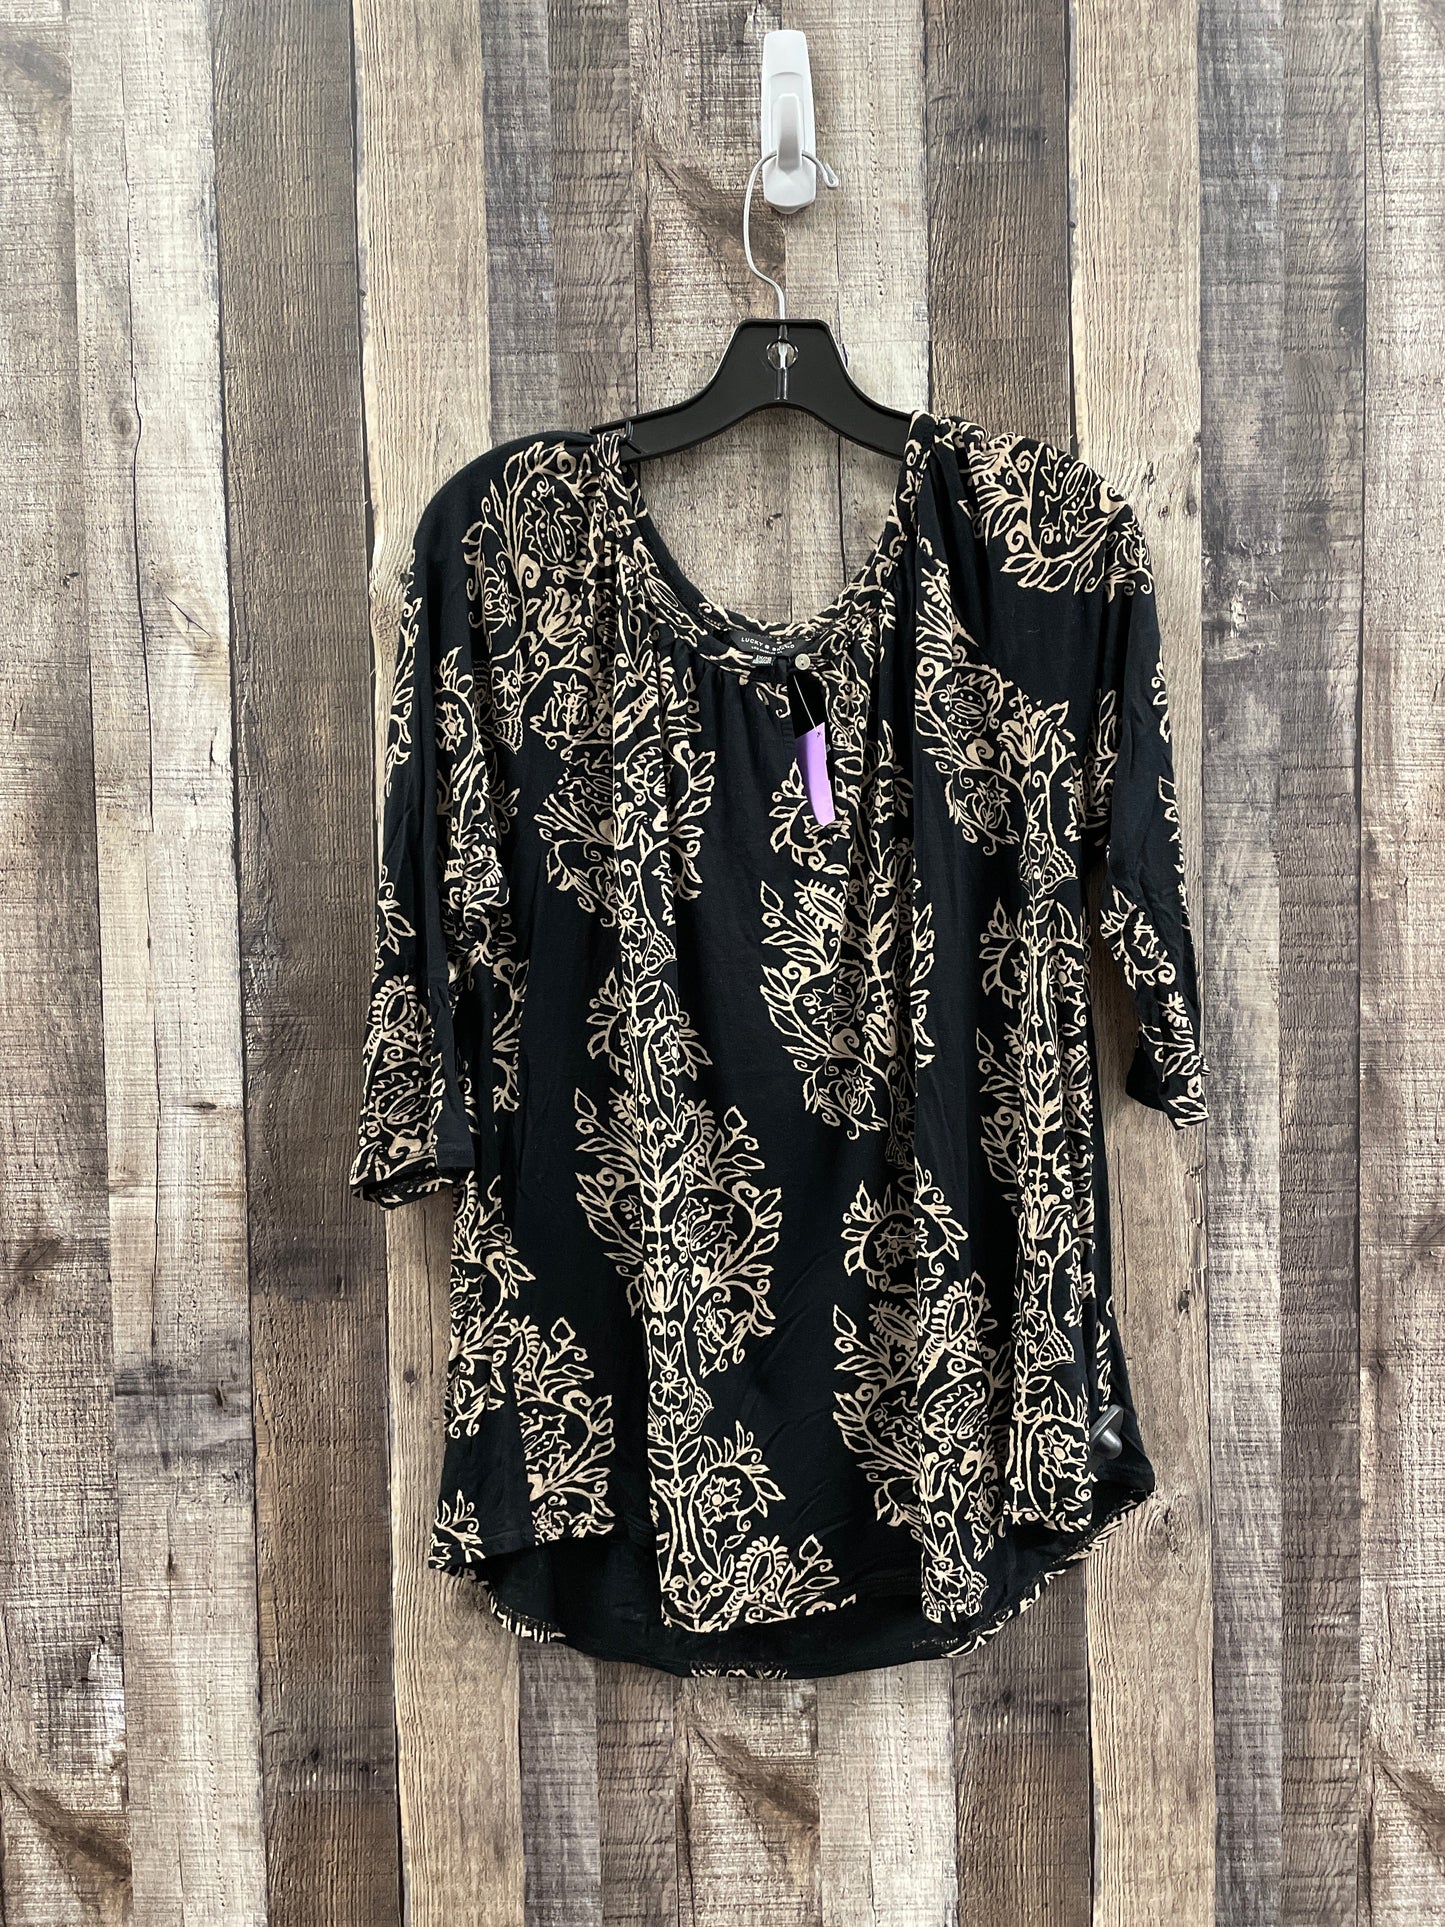 Black & Brown Top 3/4 Sleeve Lucky Brand, Size 1x